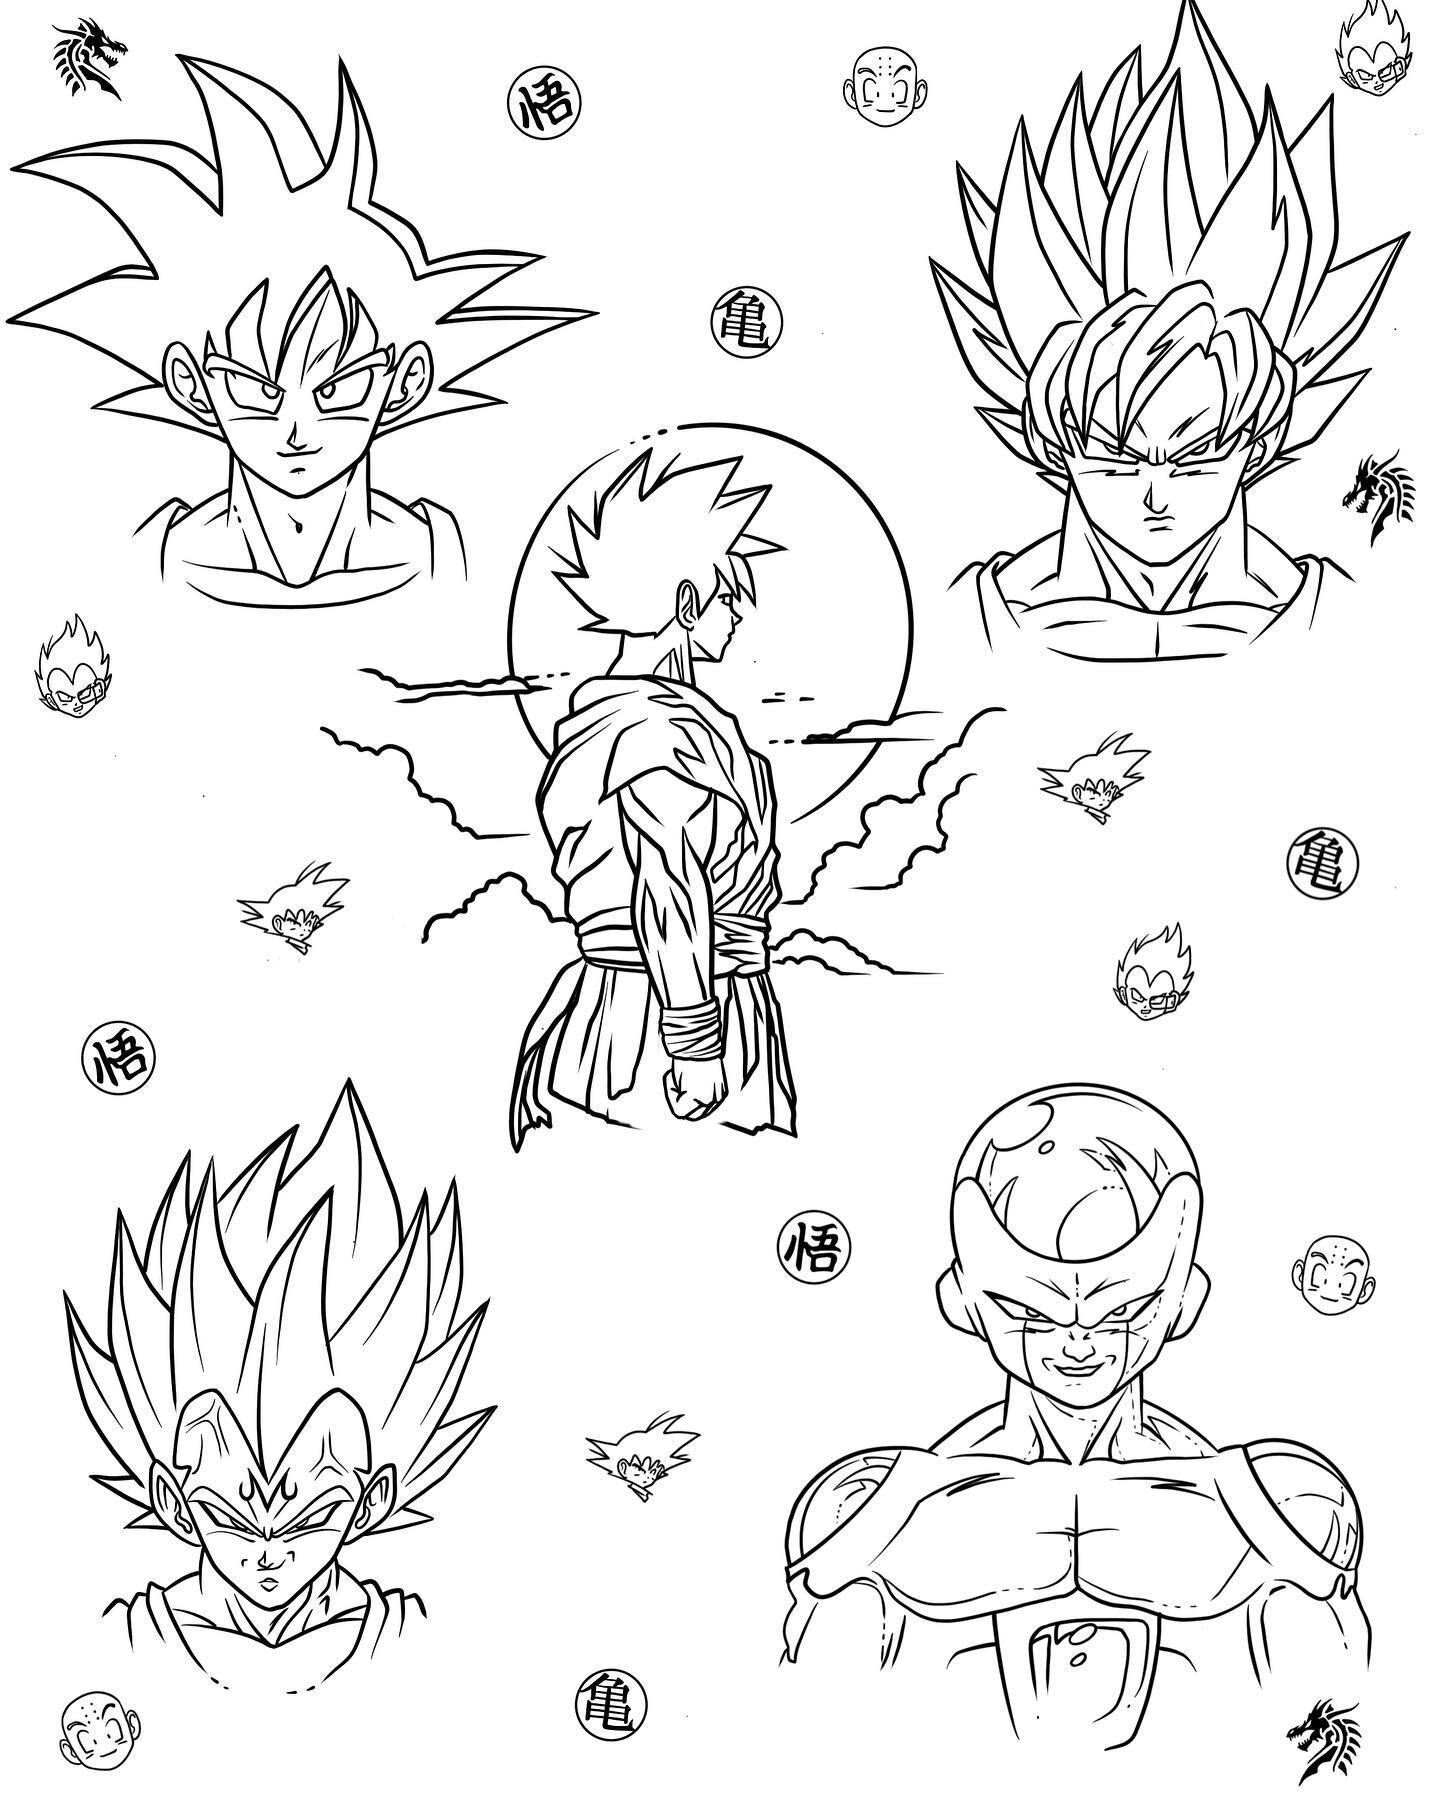 &ldquo;Dragon Ball Z&rdquo; flash sheet for April 
&bull;
In honor of Akira Toriyama, I created this flash sheet that will be available all April long!
&bull;
Swipe left to see the prices and sizes of each piece. For $50 more, each piece can be shade